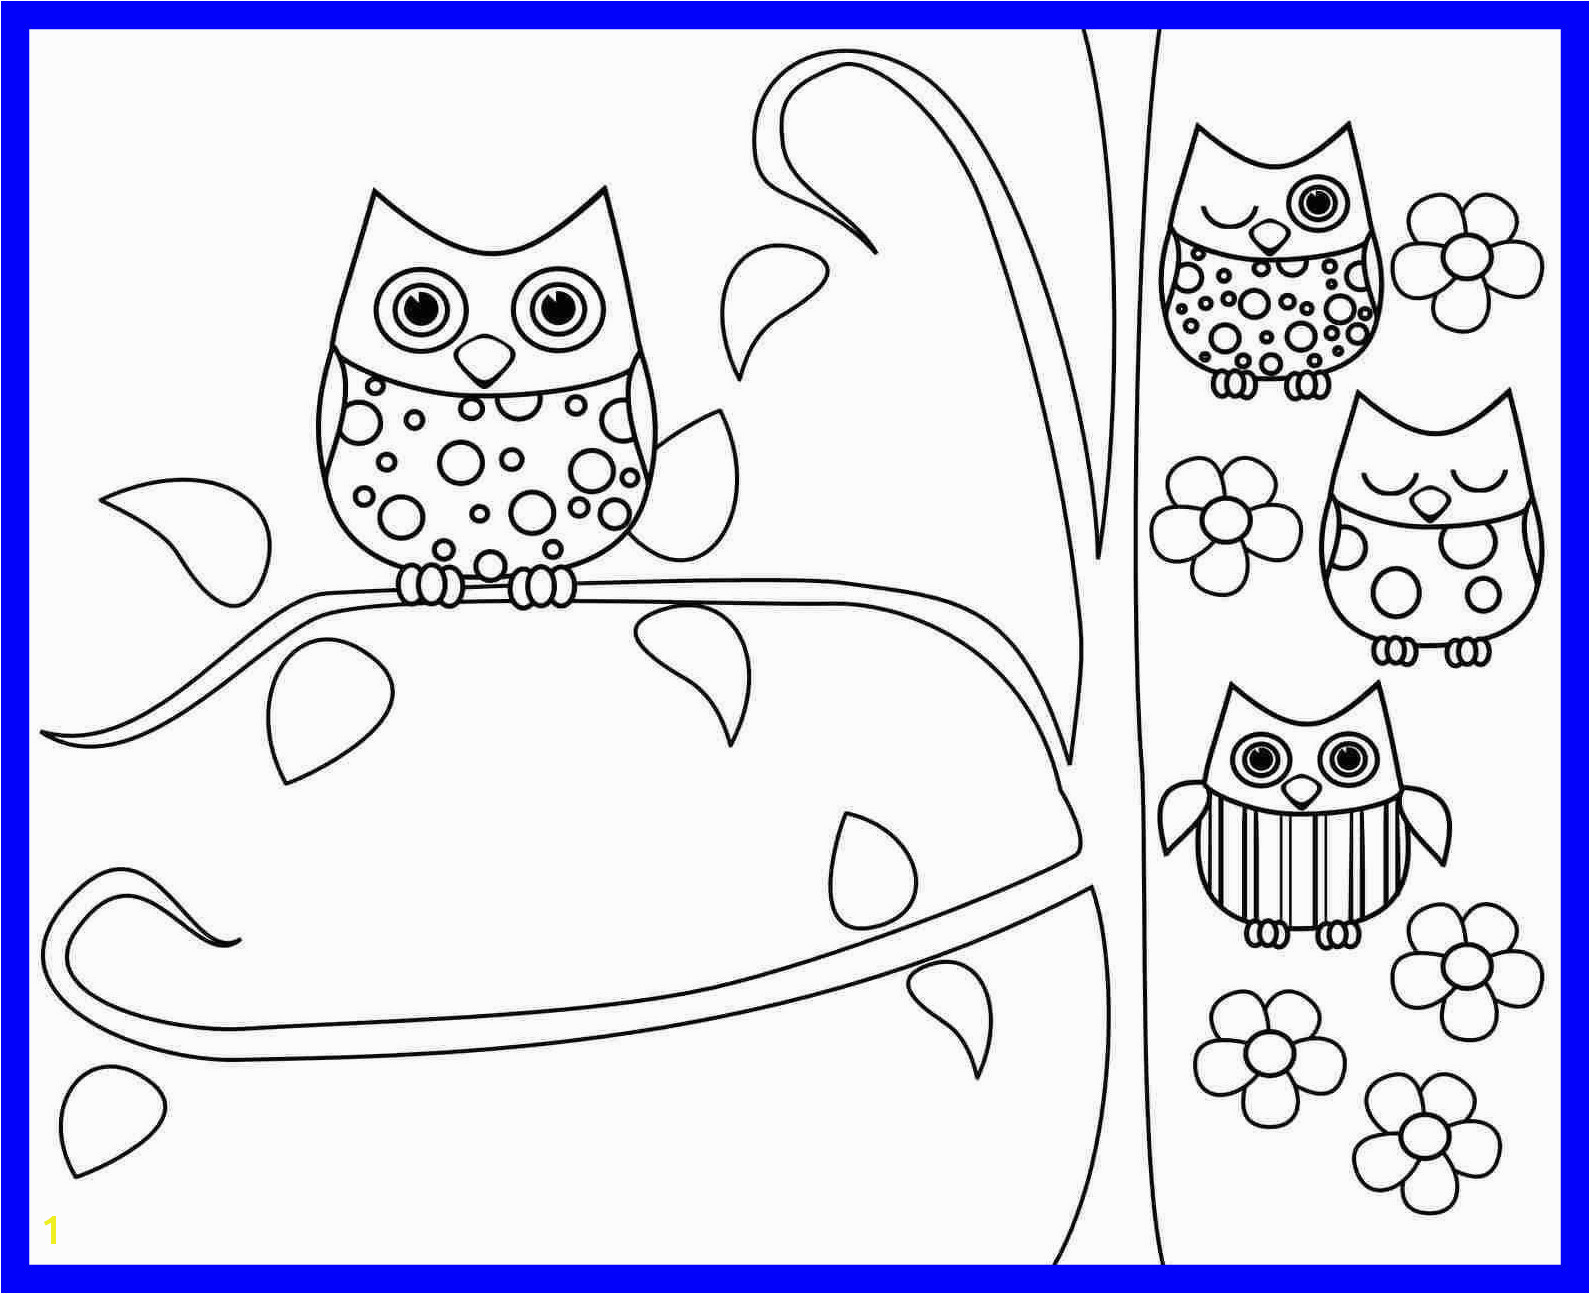 Compsognathus Coloring Page Psognathus Coloring Page Owl Coloring Pages for Adults Fresh 816